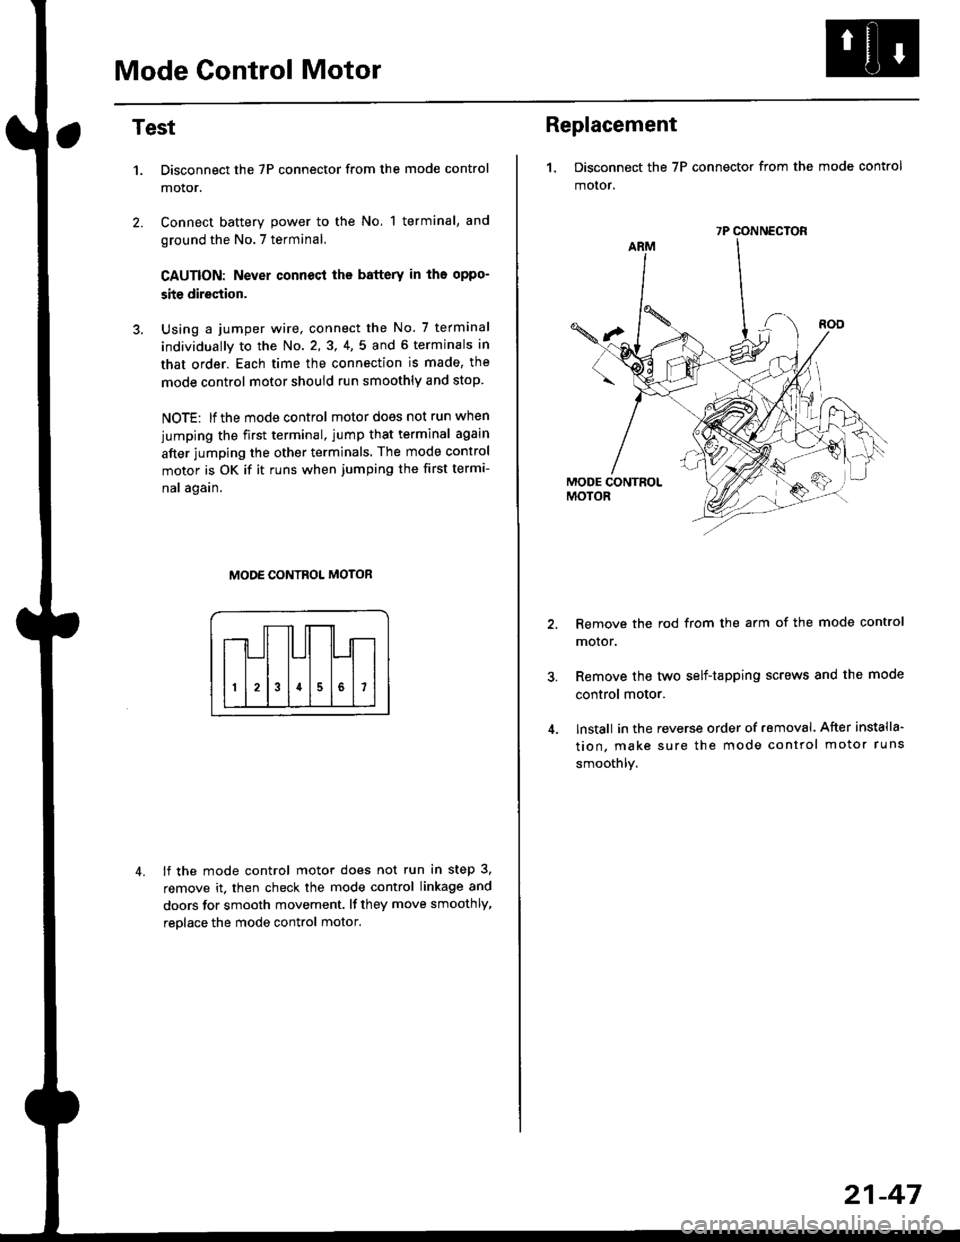 HONDA CIVIC 1996 6.G Workshop Manual Mode Control Motor
2.
Test
1.
4.
Disconnect the 7P connector from the mode control
motor.
Connect battery power to the No, 1 terminal, and
ground the No.7 terminal,
CAUTION: Never connecl the battery 